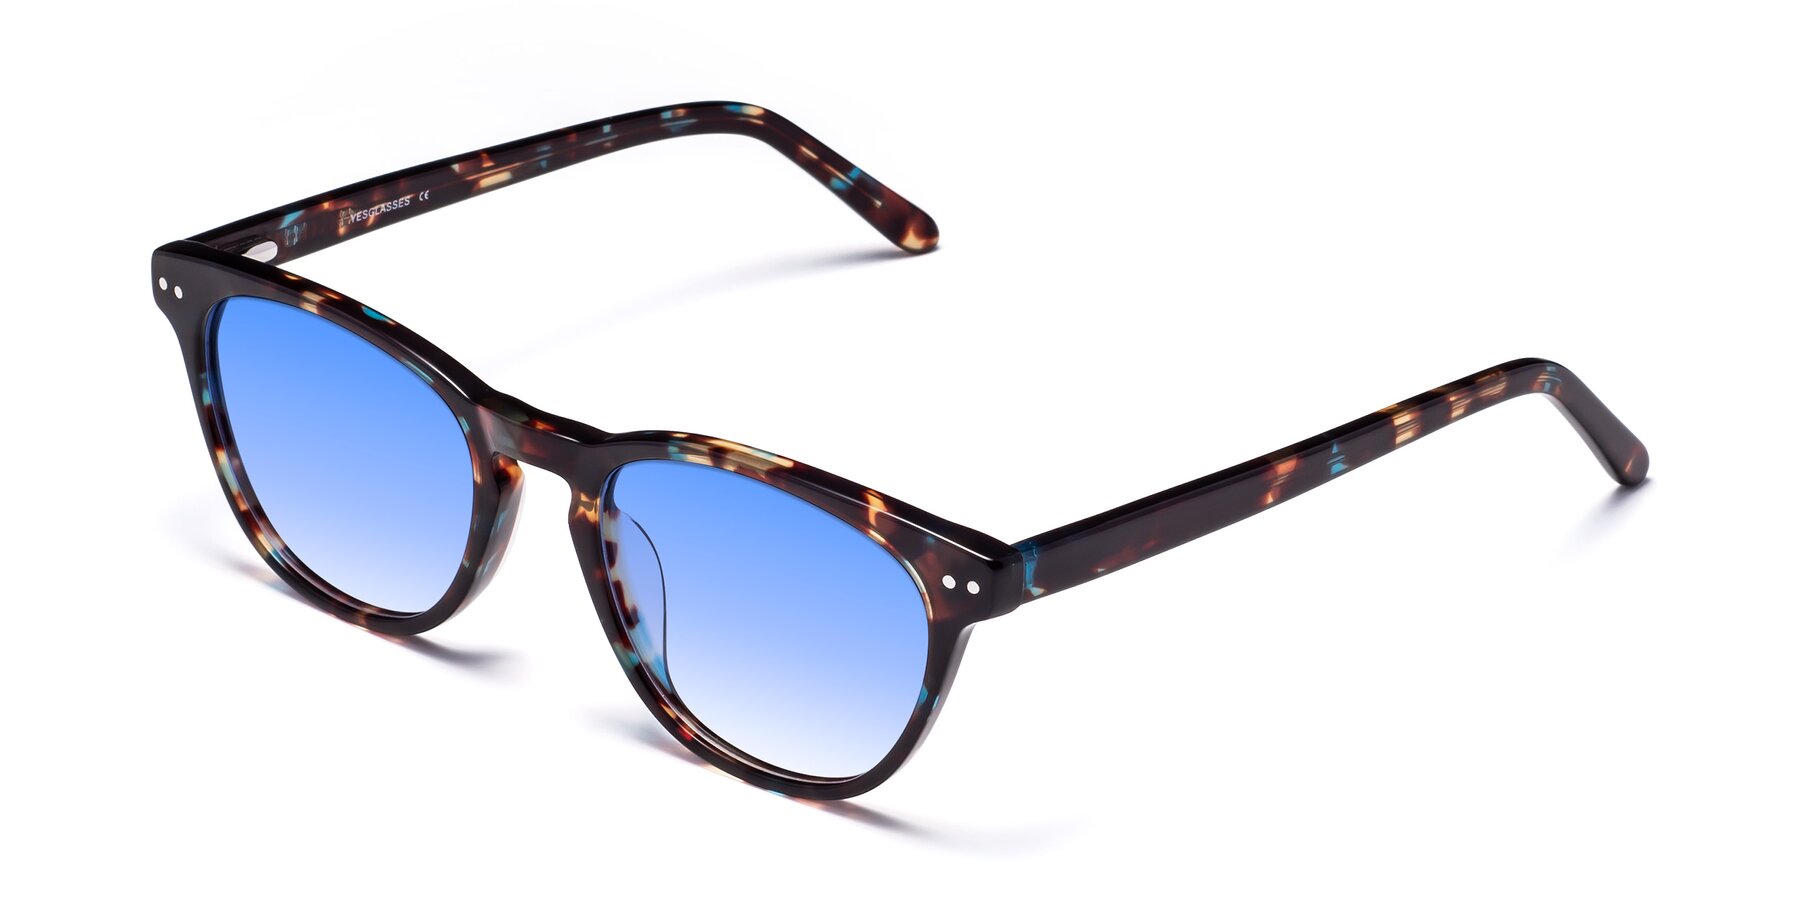 Angle of Blaze in Tortoise-Blue with Blue Gradient Lenses